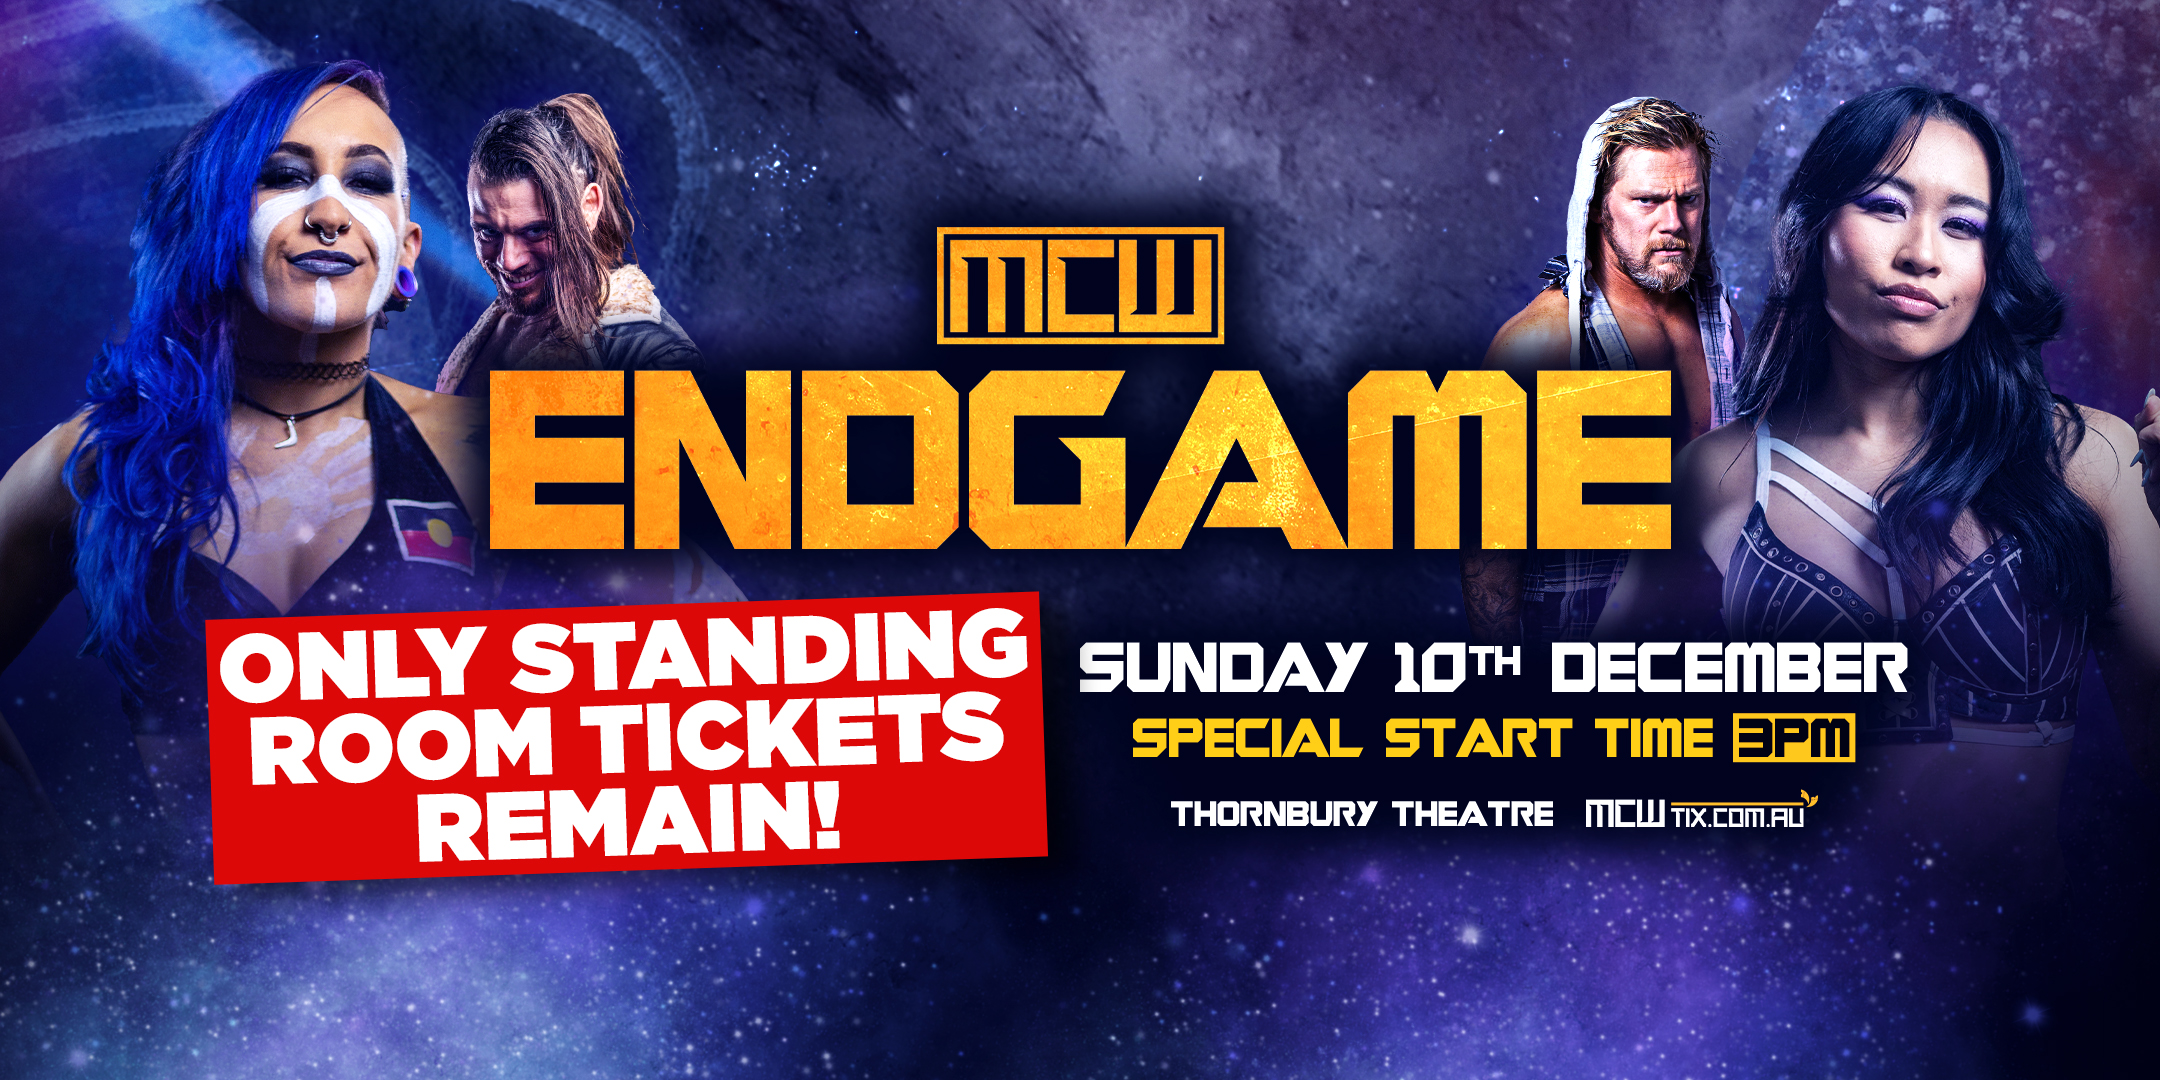 End Game – Standing Room Tickets On Sale Now